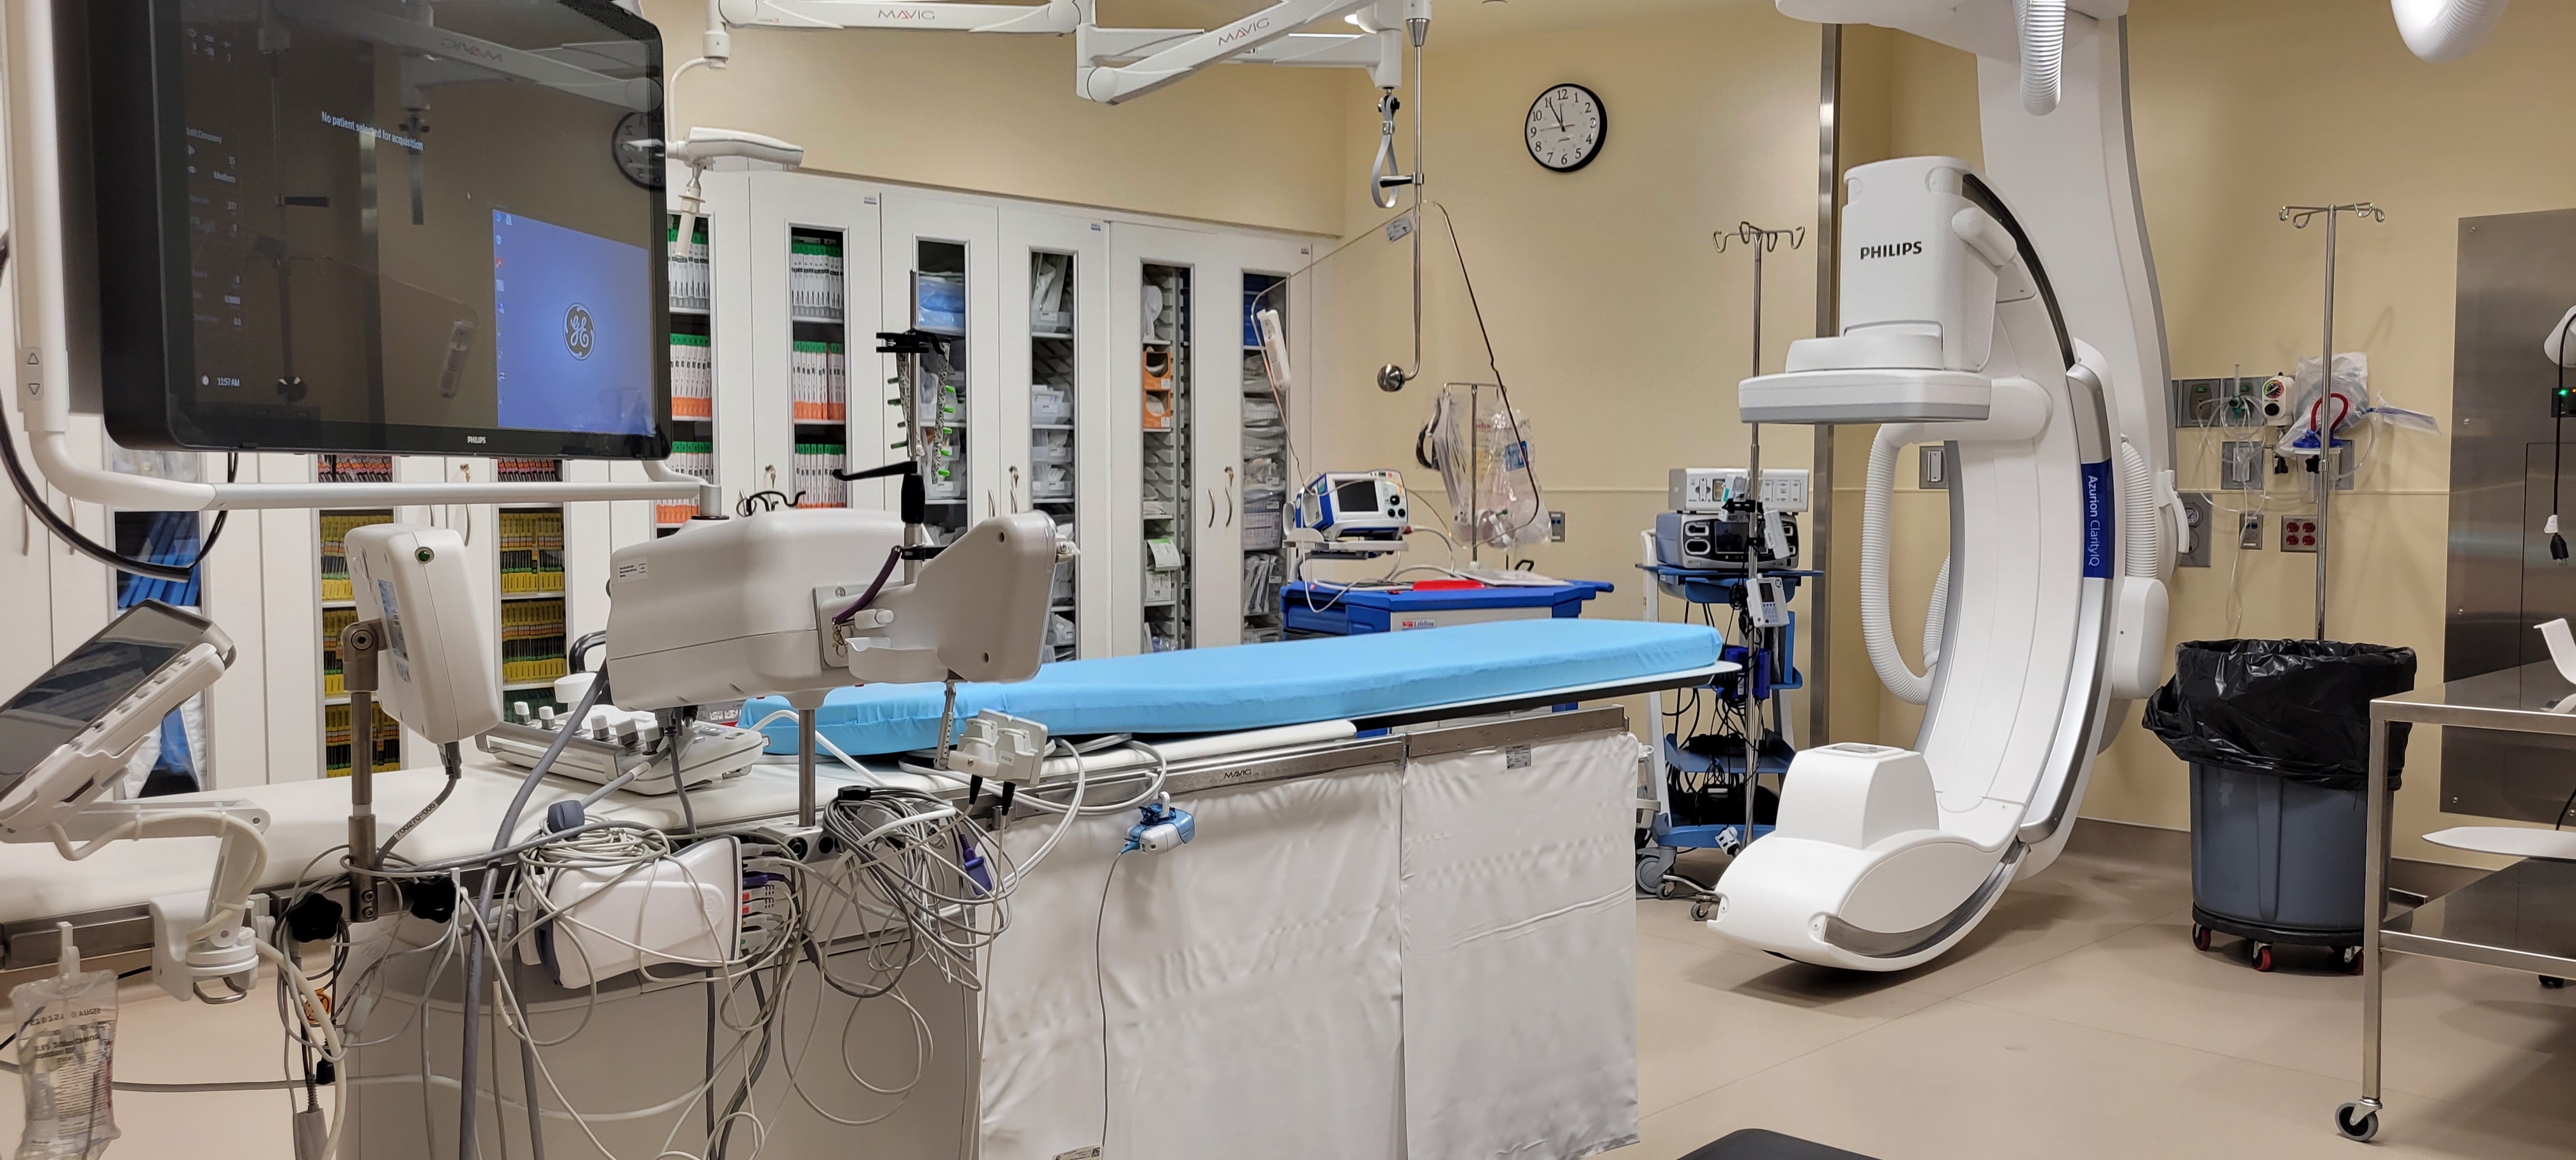 Community Hospital Performs First Thrombectomy On Western Slope Using Inari Technology